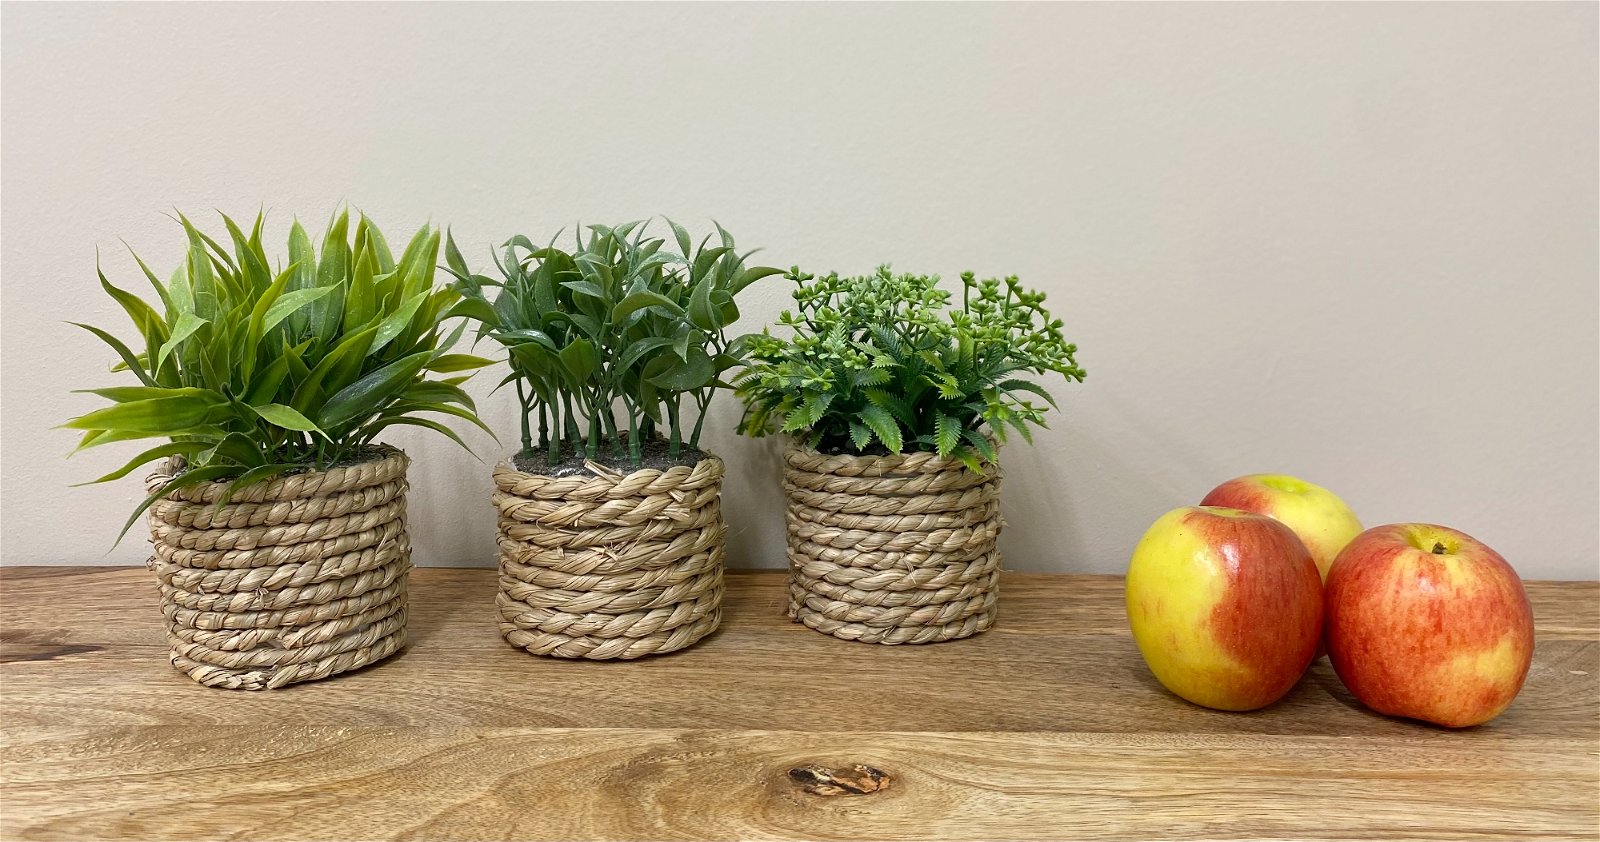 Three pots made of rope shown with green artificial succulents inside on a wooden table with candles